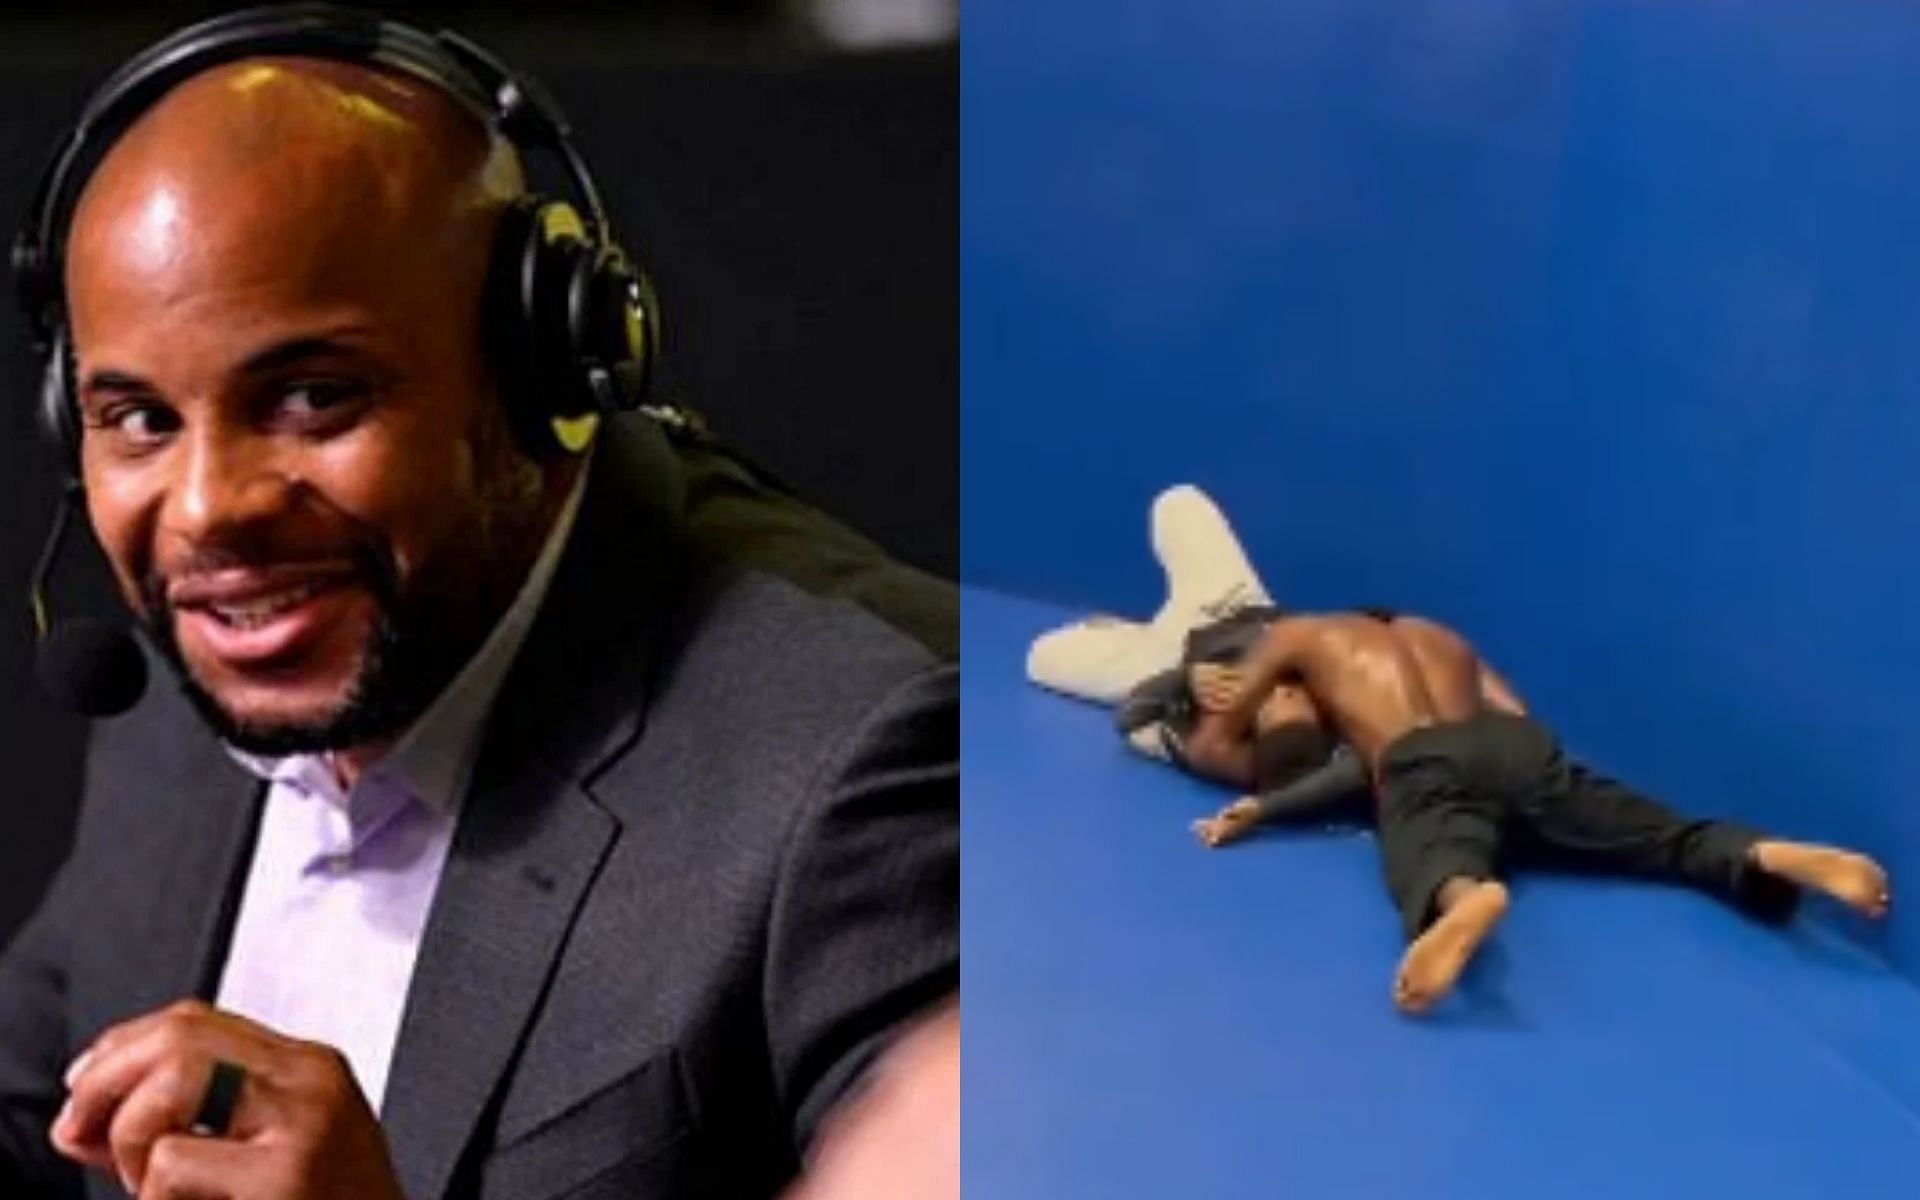 Daniel Cormier weighs in on Kevin Holland submitting online troll in a grappling match